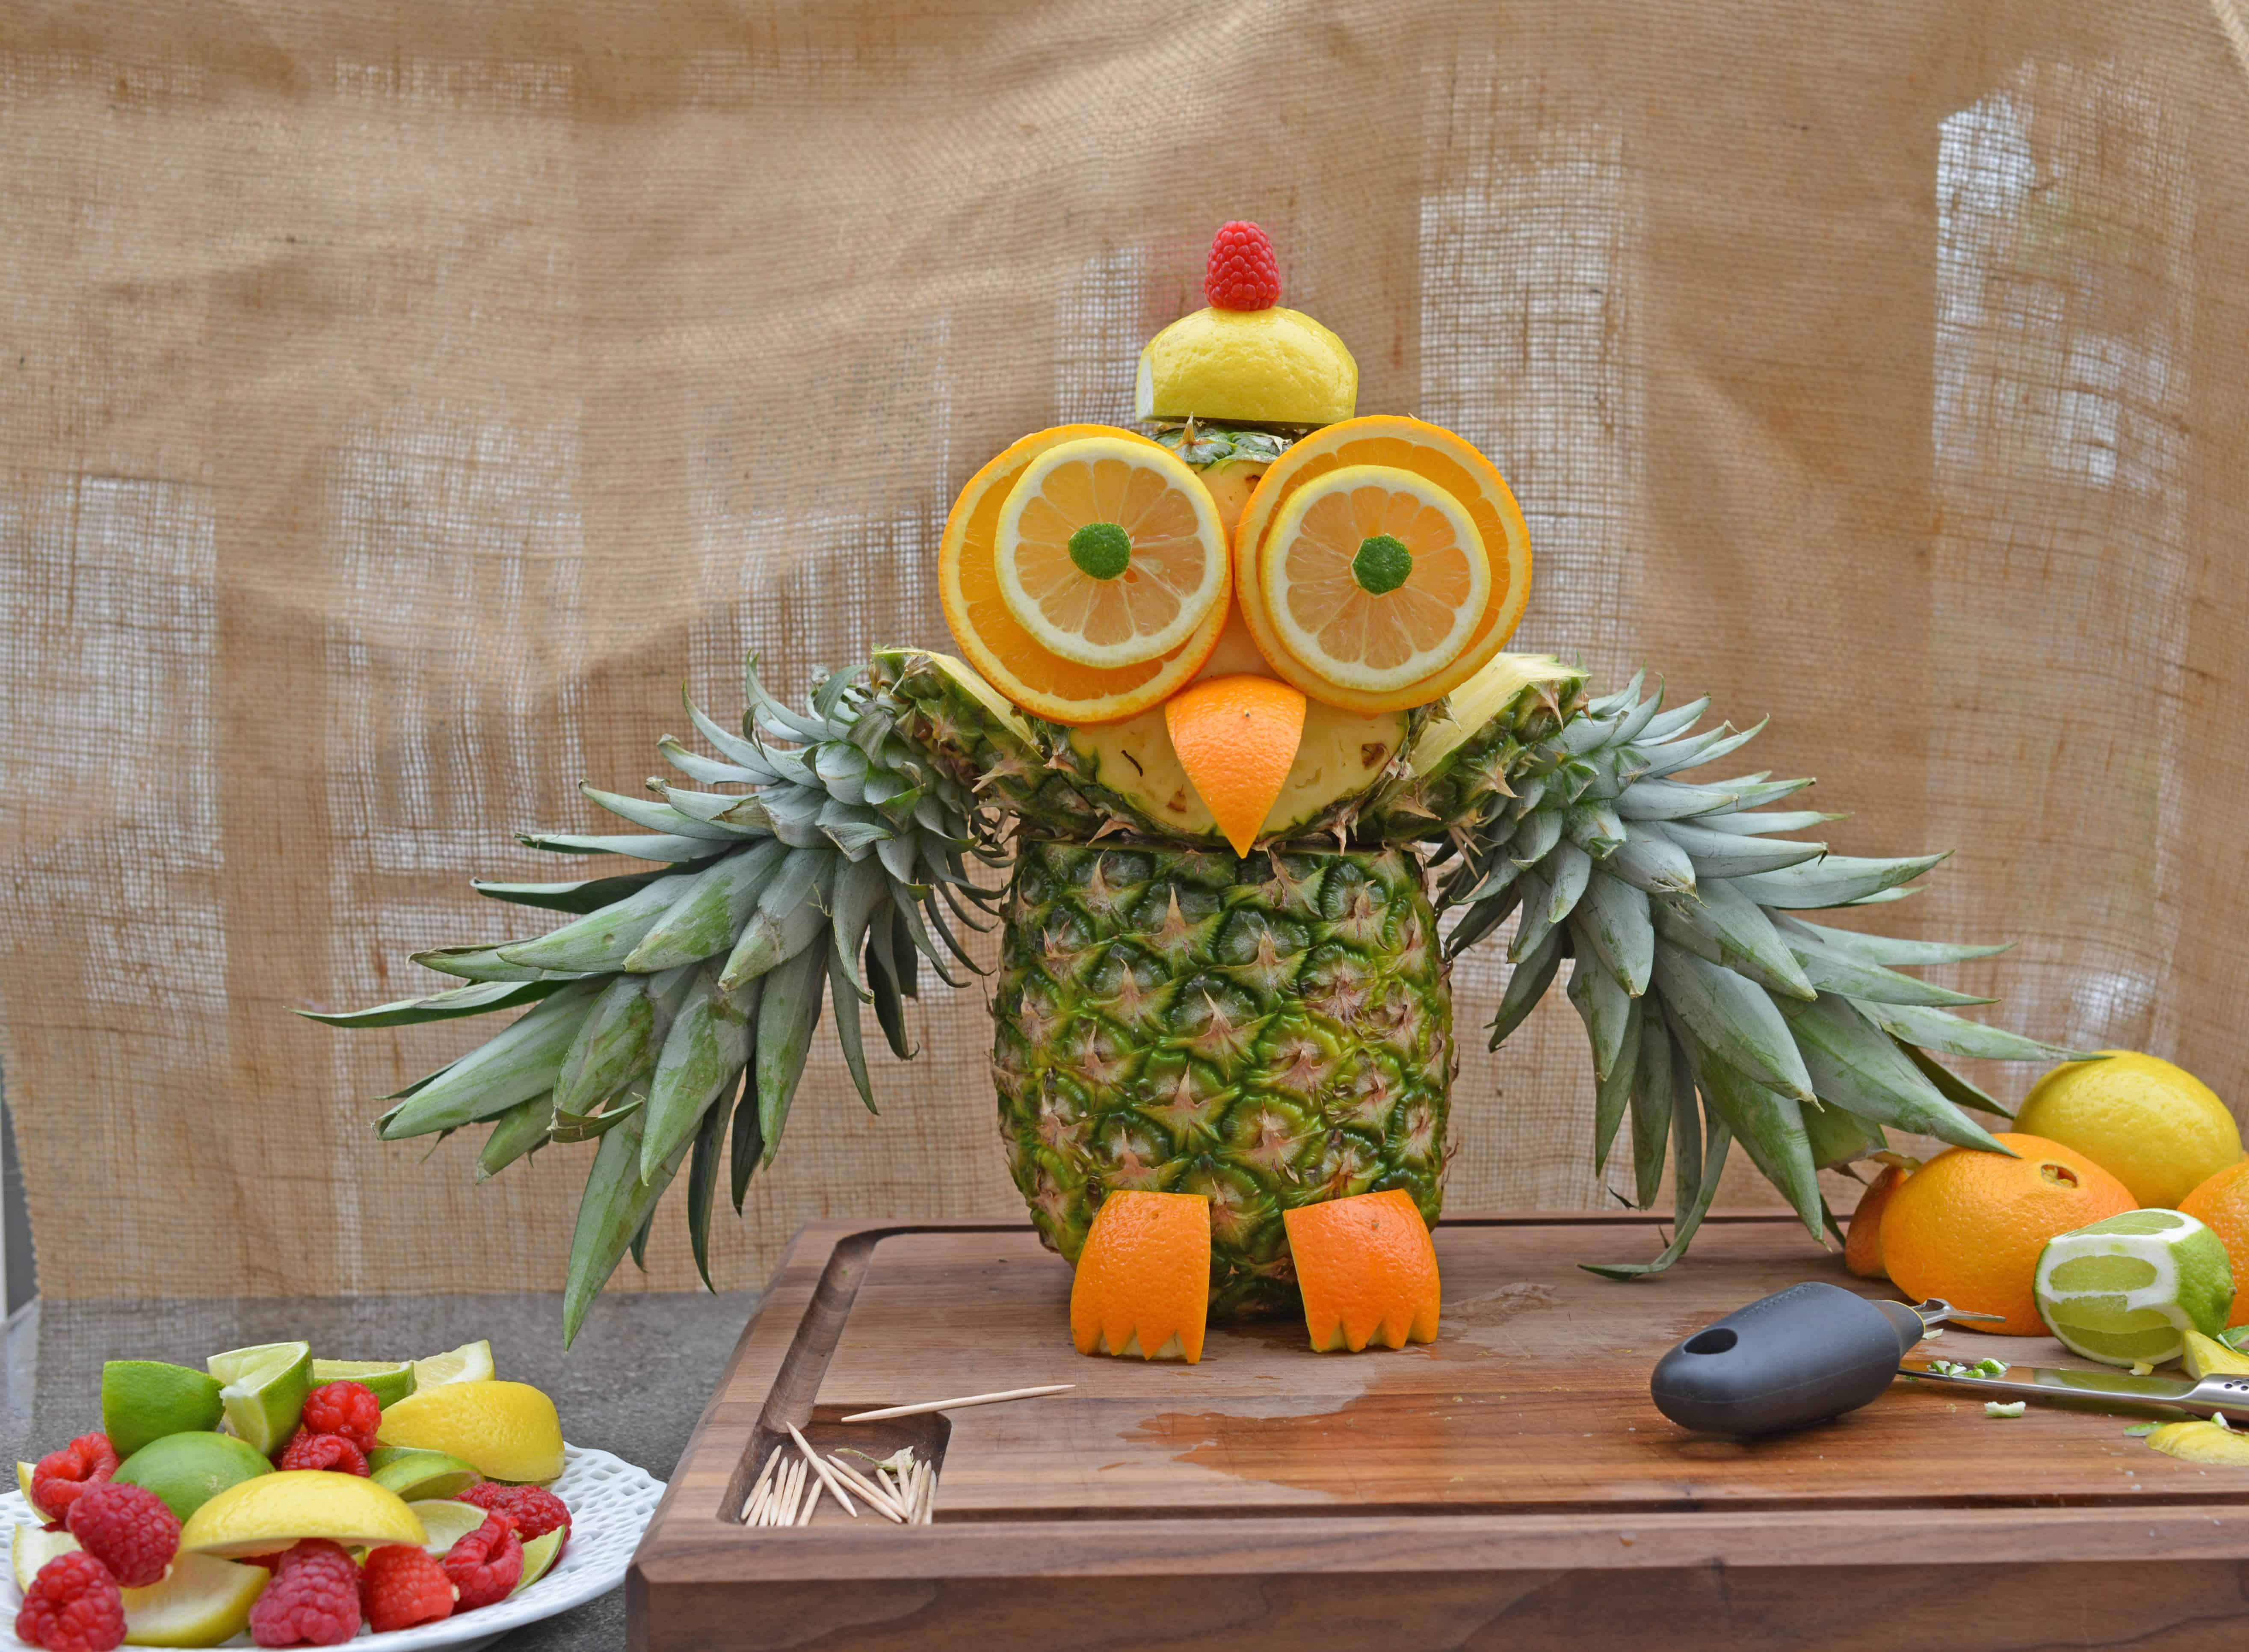 Pineapple Owl Fruit Sculpture- take melon craving to a whole new level with this cute fruit animal owl. This fruit carving idea only takes 15 minutes and is super easy, without much actual “carving” at all. Plus, pineapple recipes so your pineapple owl doesn’t go to waste. www.savoryexperiments.com